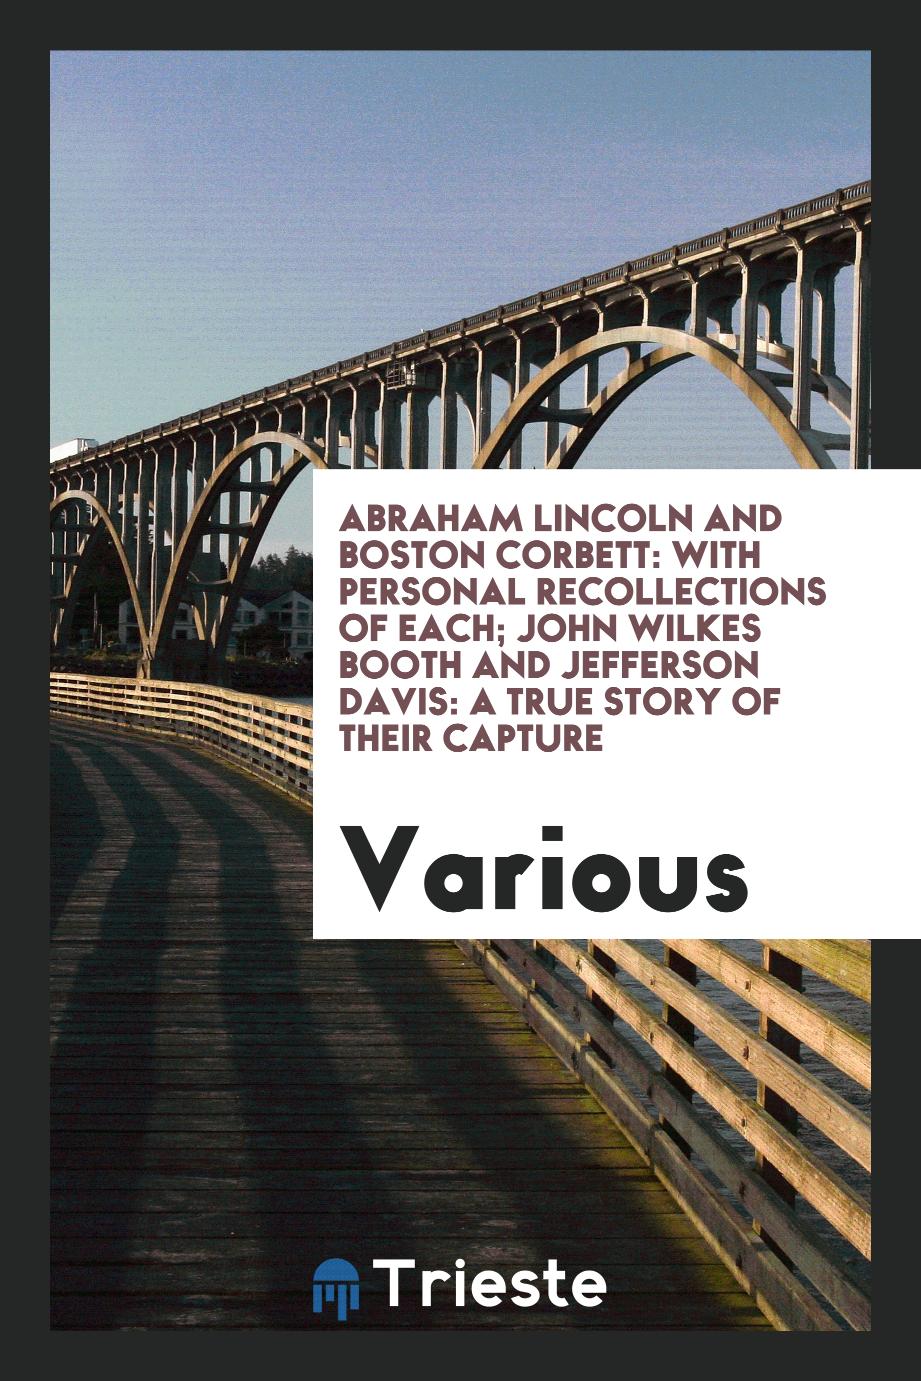 Abraham Lincoln and Boston Corbett: With Personal Recollections of Each; John Wilkes Booth and Jefferson Davis: A true story of their capture